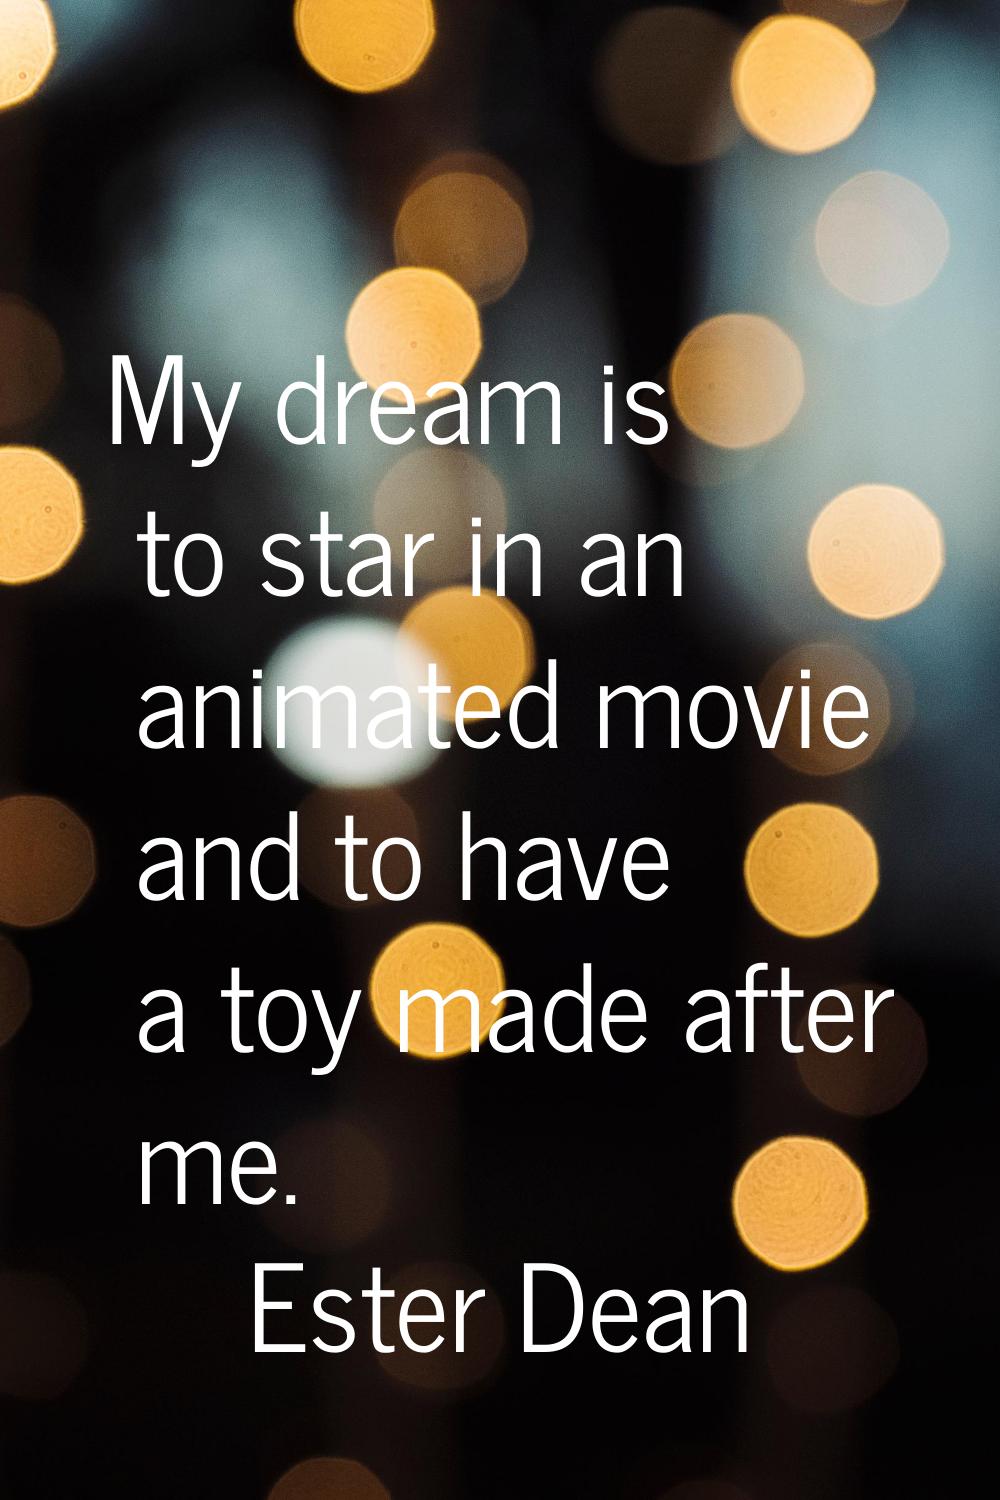 My dream is to star in an animated movie and to have a toy made after me.